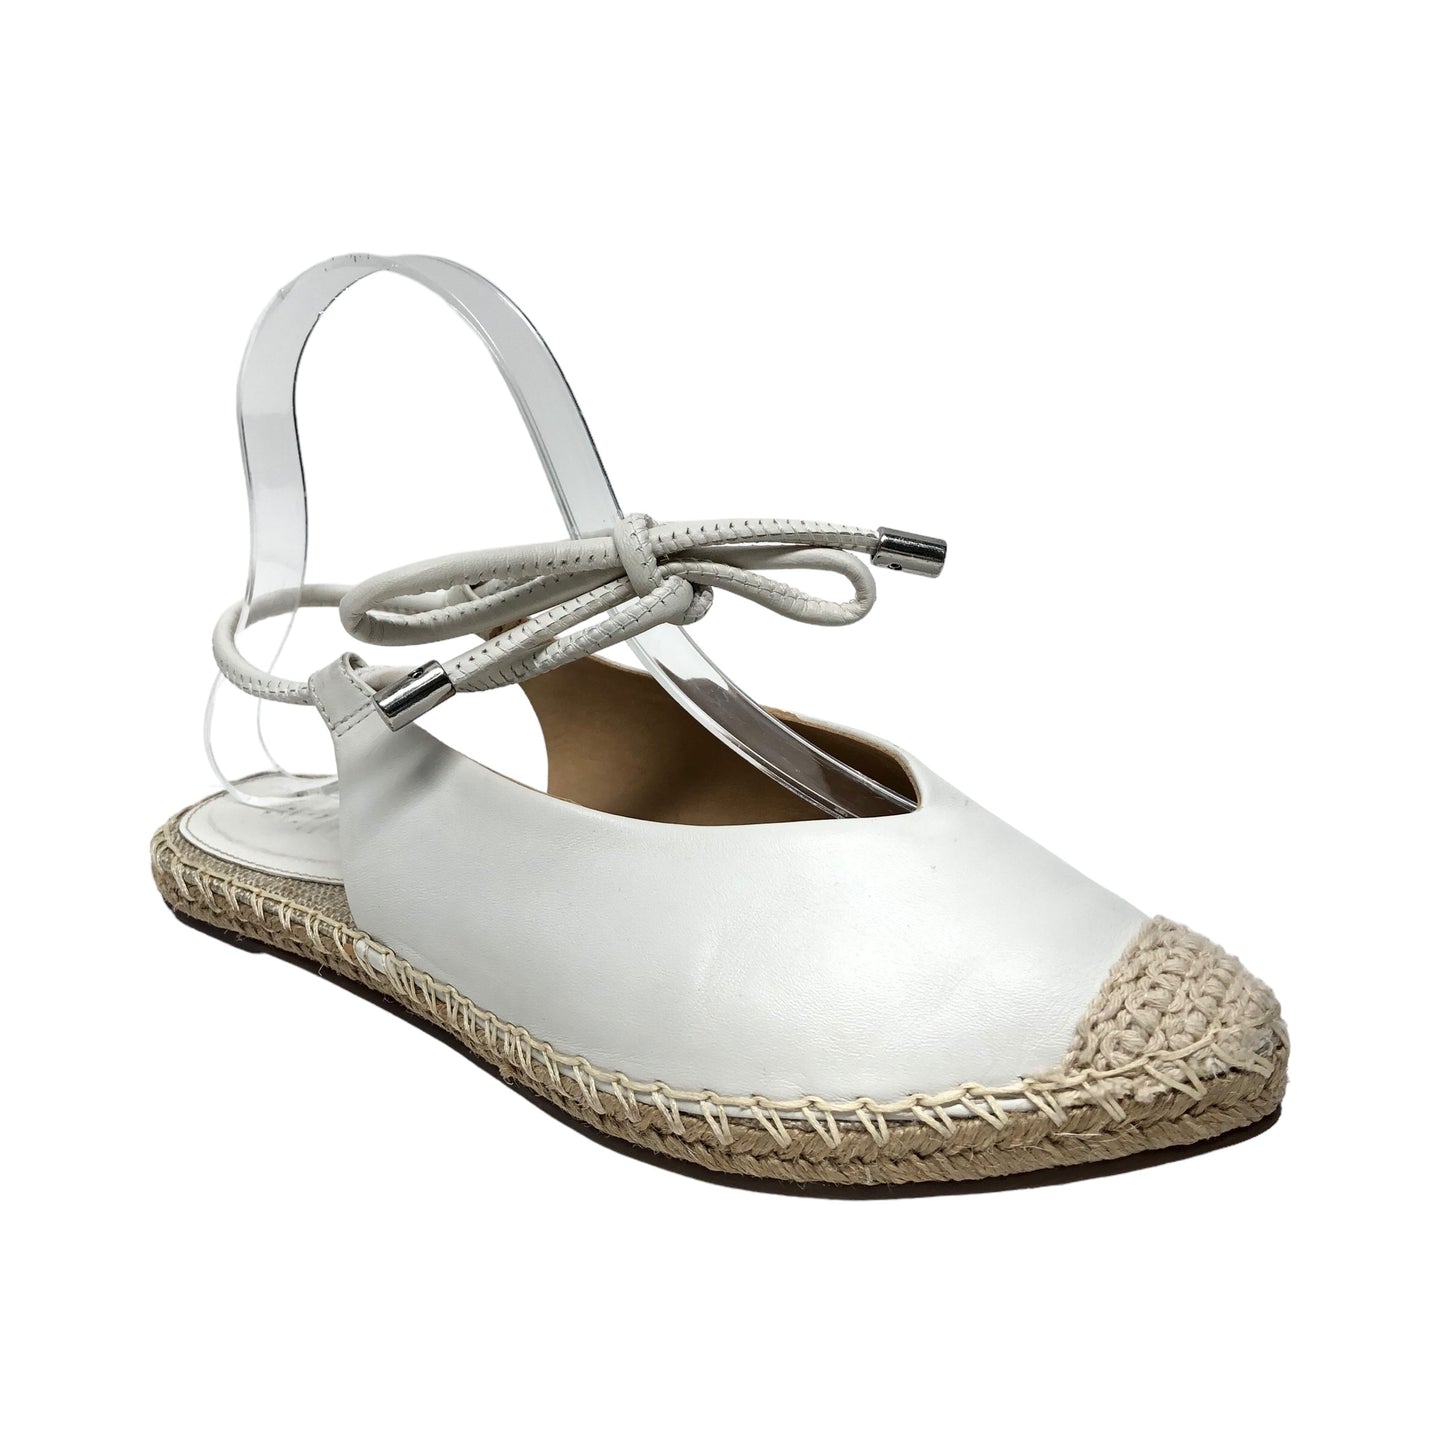 Shoes Flats By Cma  Size: 7.5